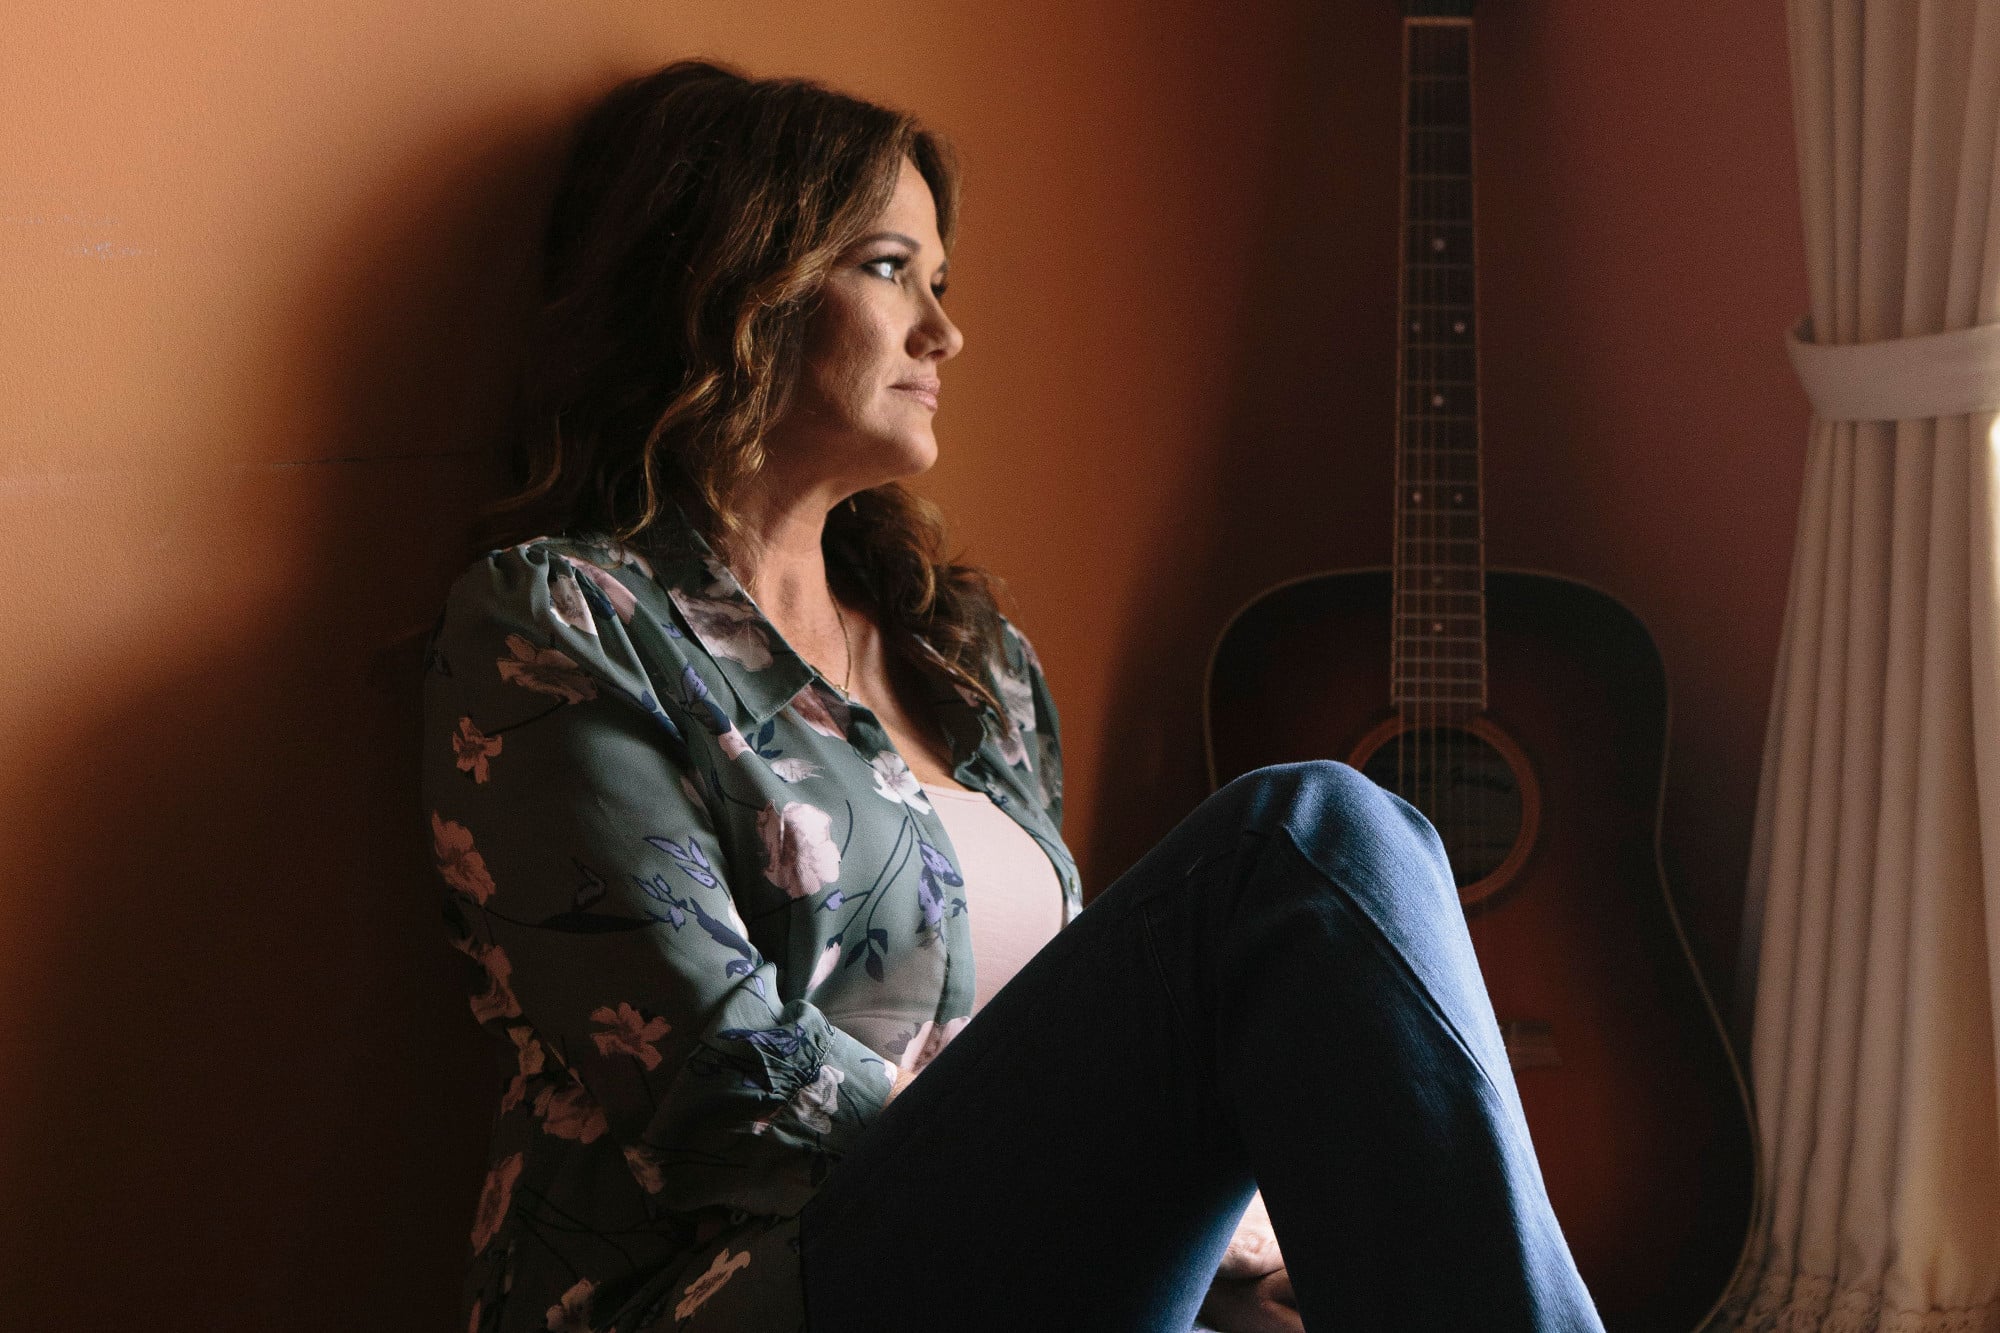 Alecia Nugent Returns With Stegall-Produced Country Album After 10-Year Hiatus